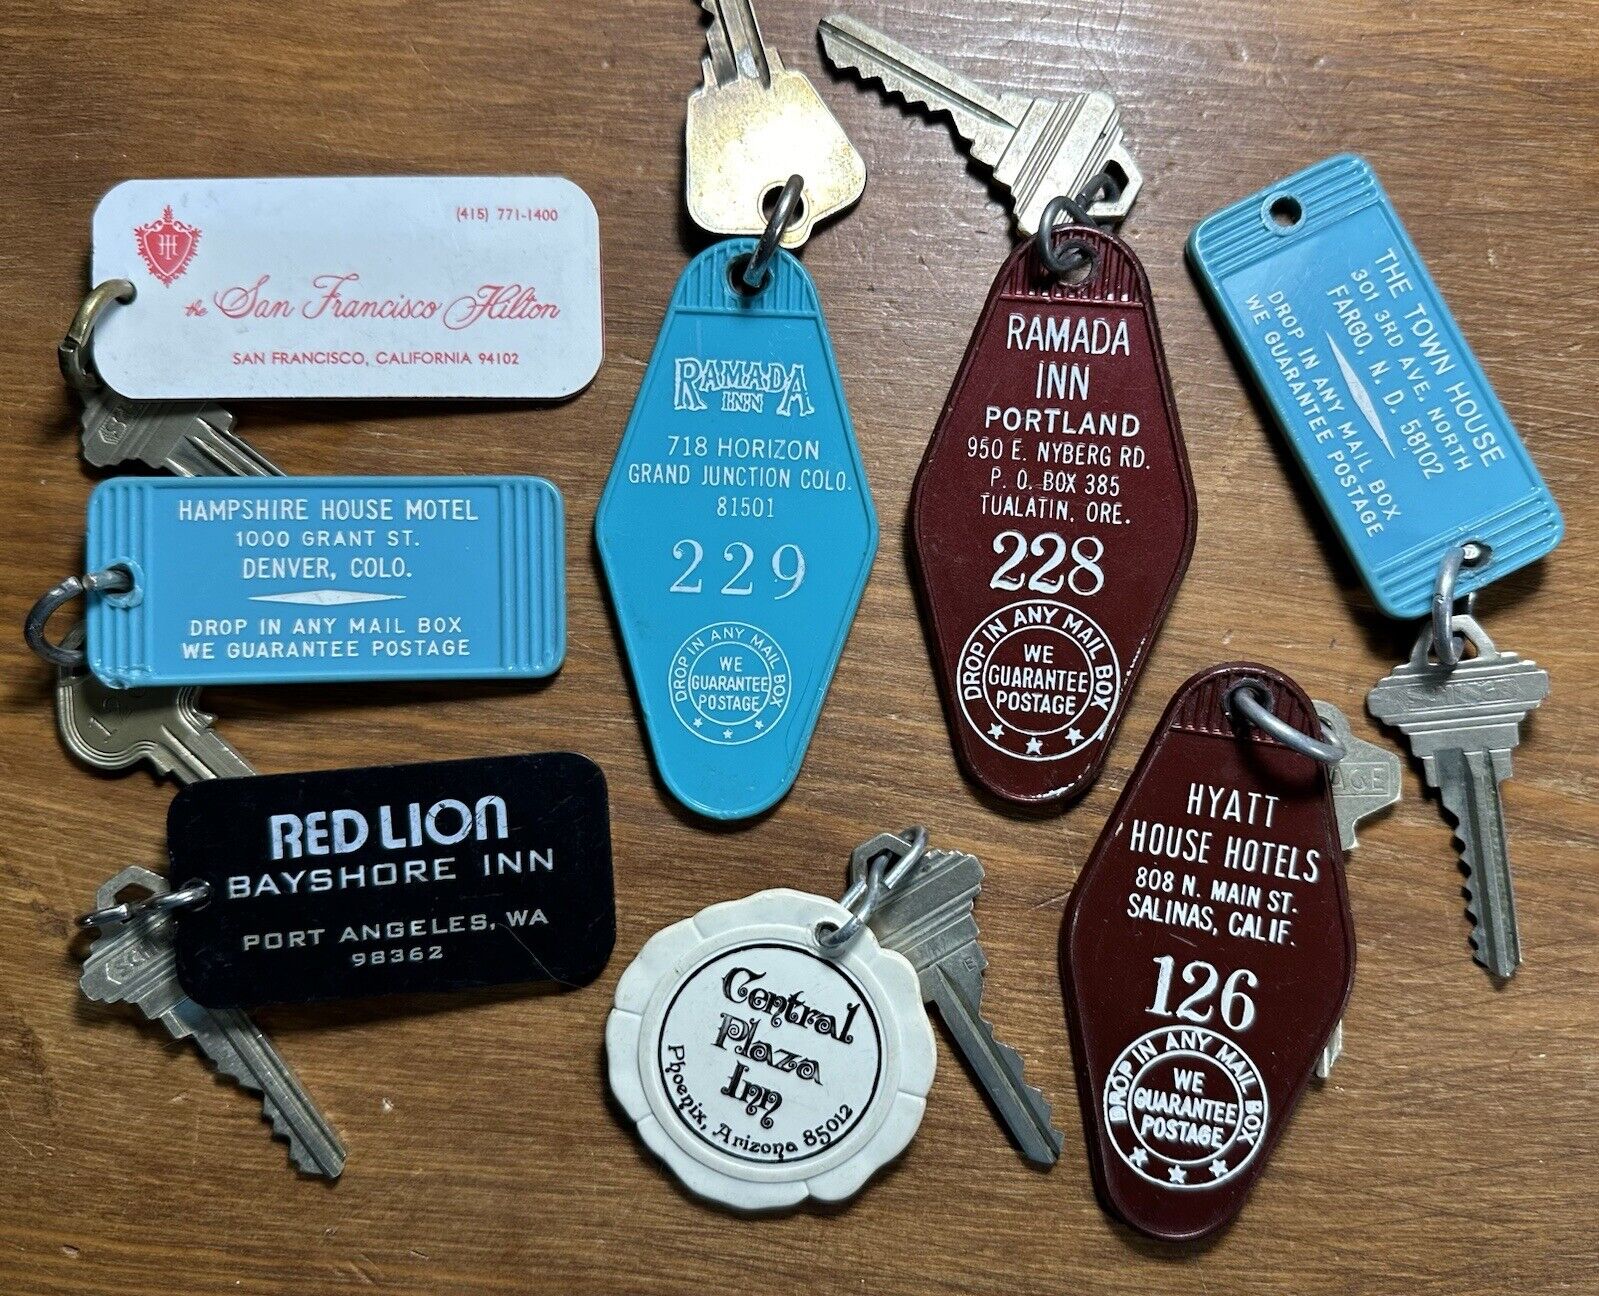 Vintage 1960s/70s Hotel Motel Room Keys & Fobs Mixed Lot Collection #5